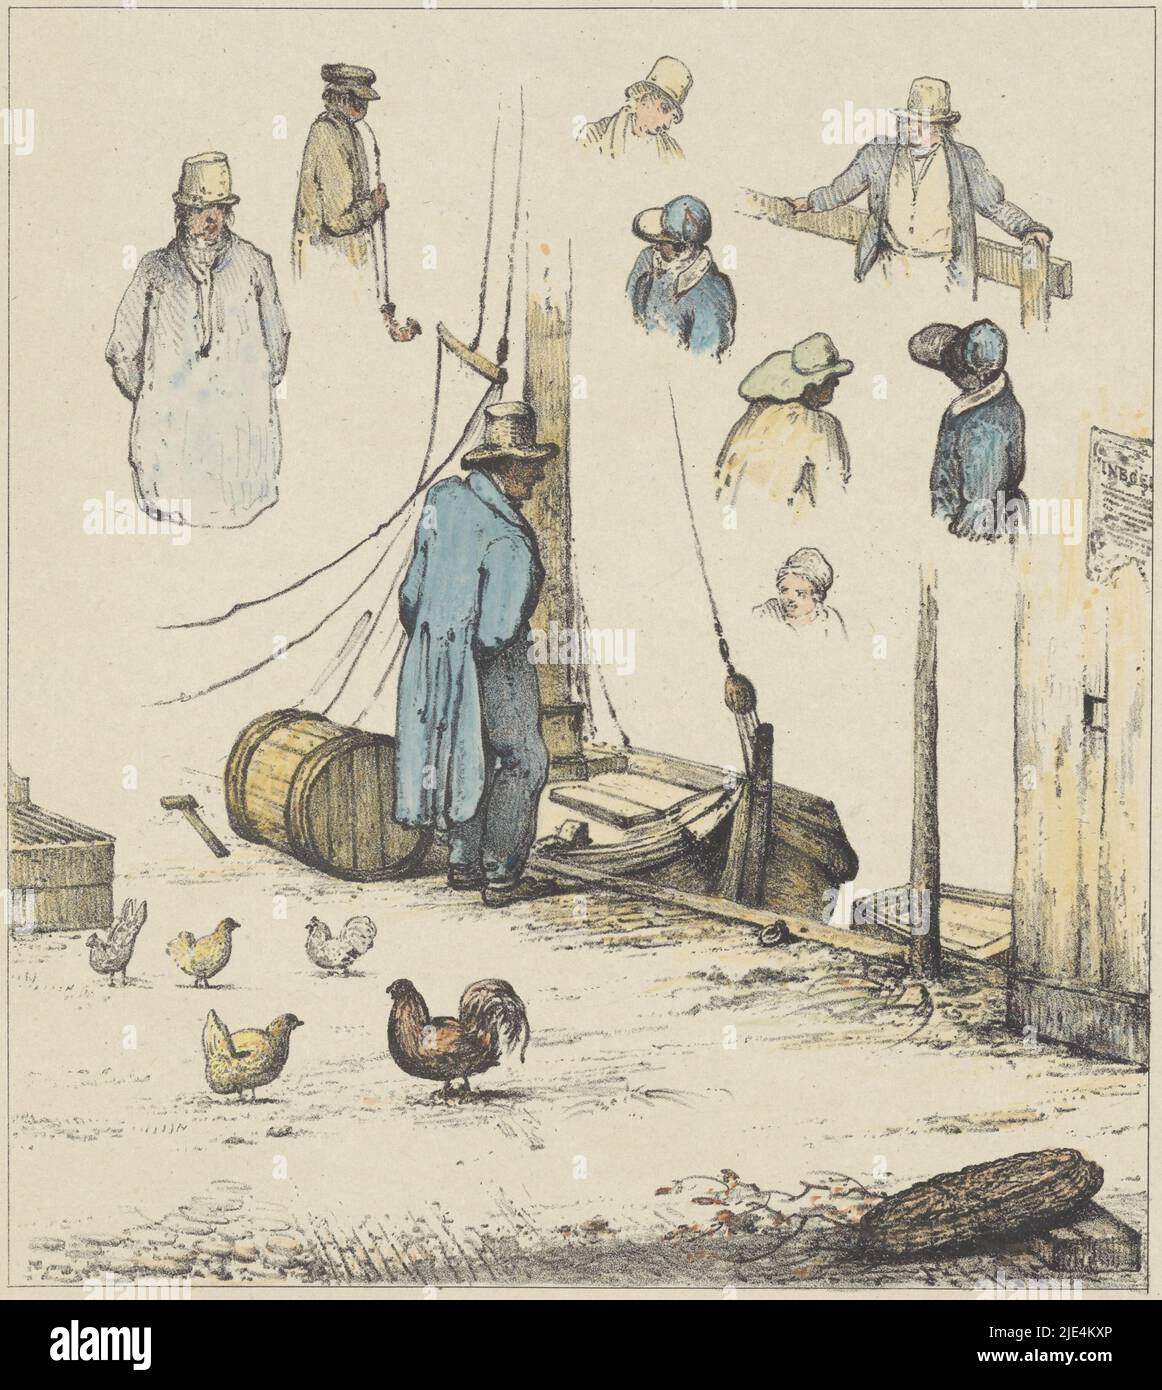 Figure studies (fourth sheet), 1833, Christiaan Andriessen, 1833, Sheet with figures: a man standing by a quay, chickens scurrying in the foreground. Part of a series of six sheets of figure studies of Dutch costumes, street figures and customs, 1833., print maker: Christiaan Andriessen, publisher: weduwe L. van Hulst & Zoon, print maker: Netherlands, publisher: Amsterdam, 1833, paper, h 340 mm × w 267 mm Stock Photo